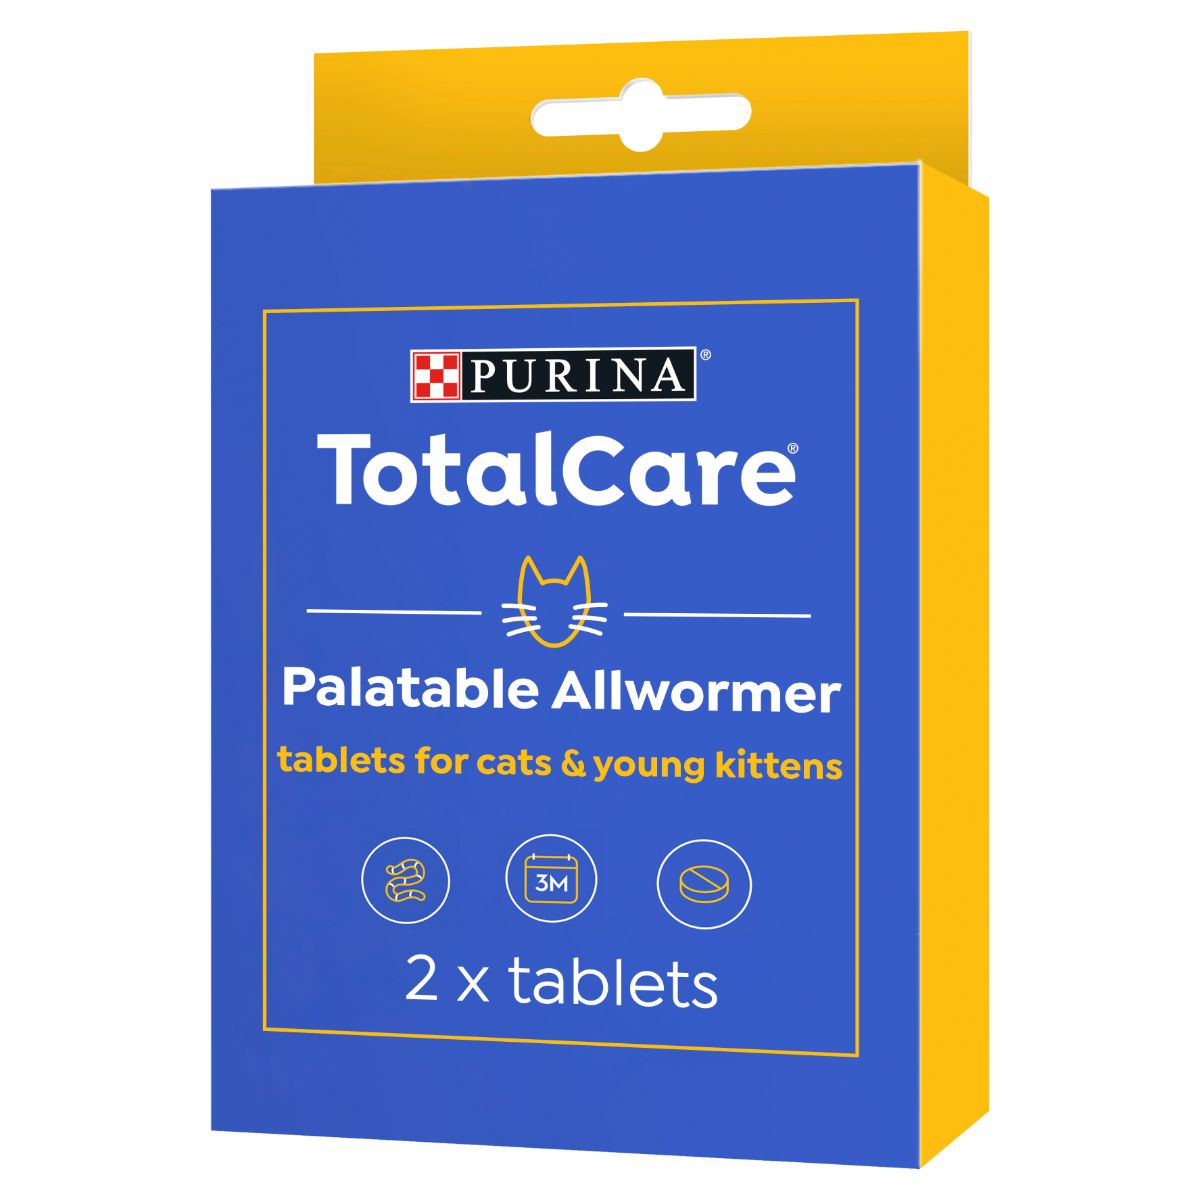 Purina Total Care Palatable Allwormer Tablets For Cats & Kittens 2 Tablets